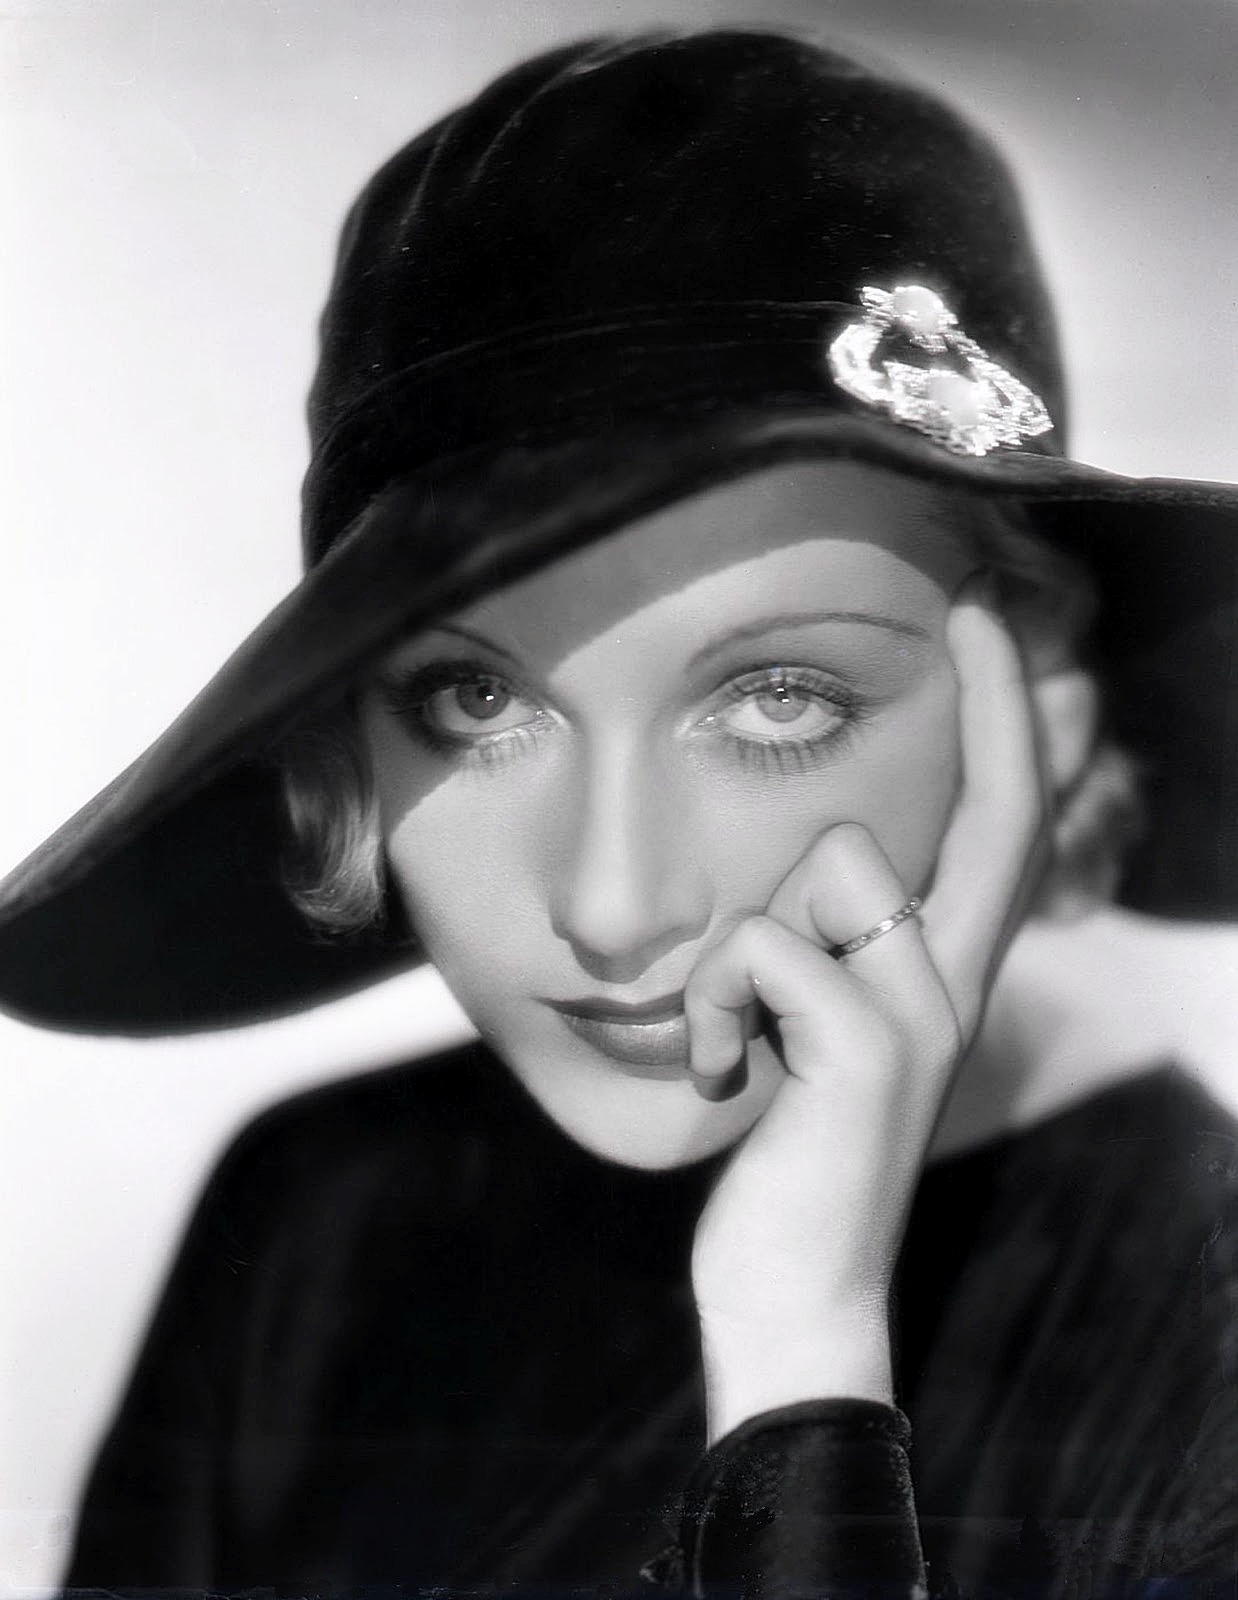 Carole Lombard, 1934
“I can’t imagine a duller fate than being the best-dressed woman in reality. When I want to do something, I don’t pause to contemplate whether I’m exquisitely gowned. I want to live, not pose!” Lombard didn’t like posing for the...